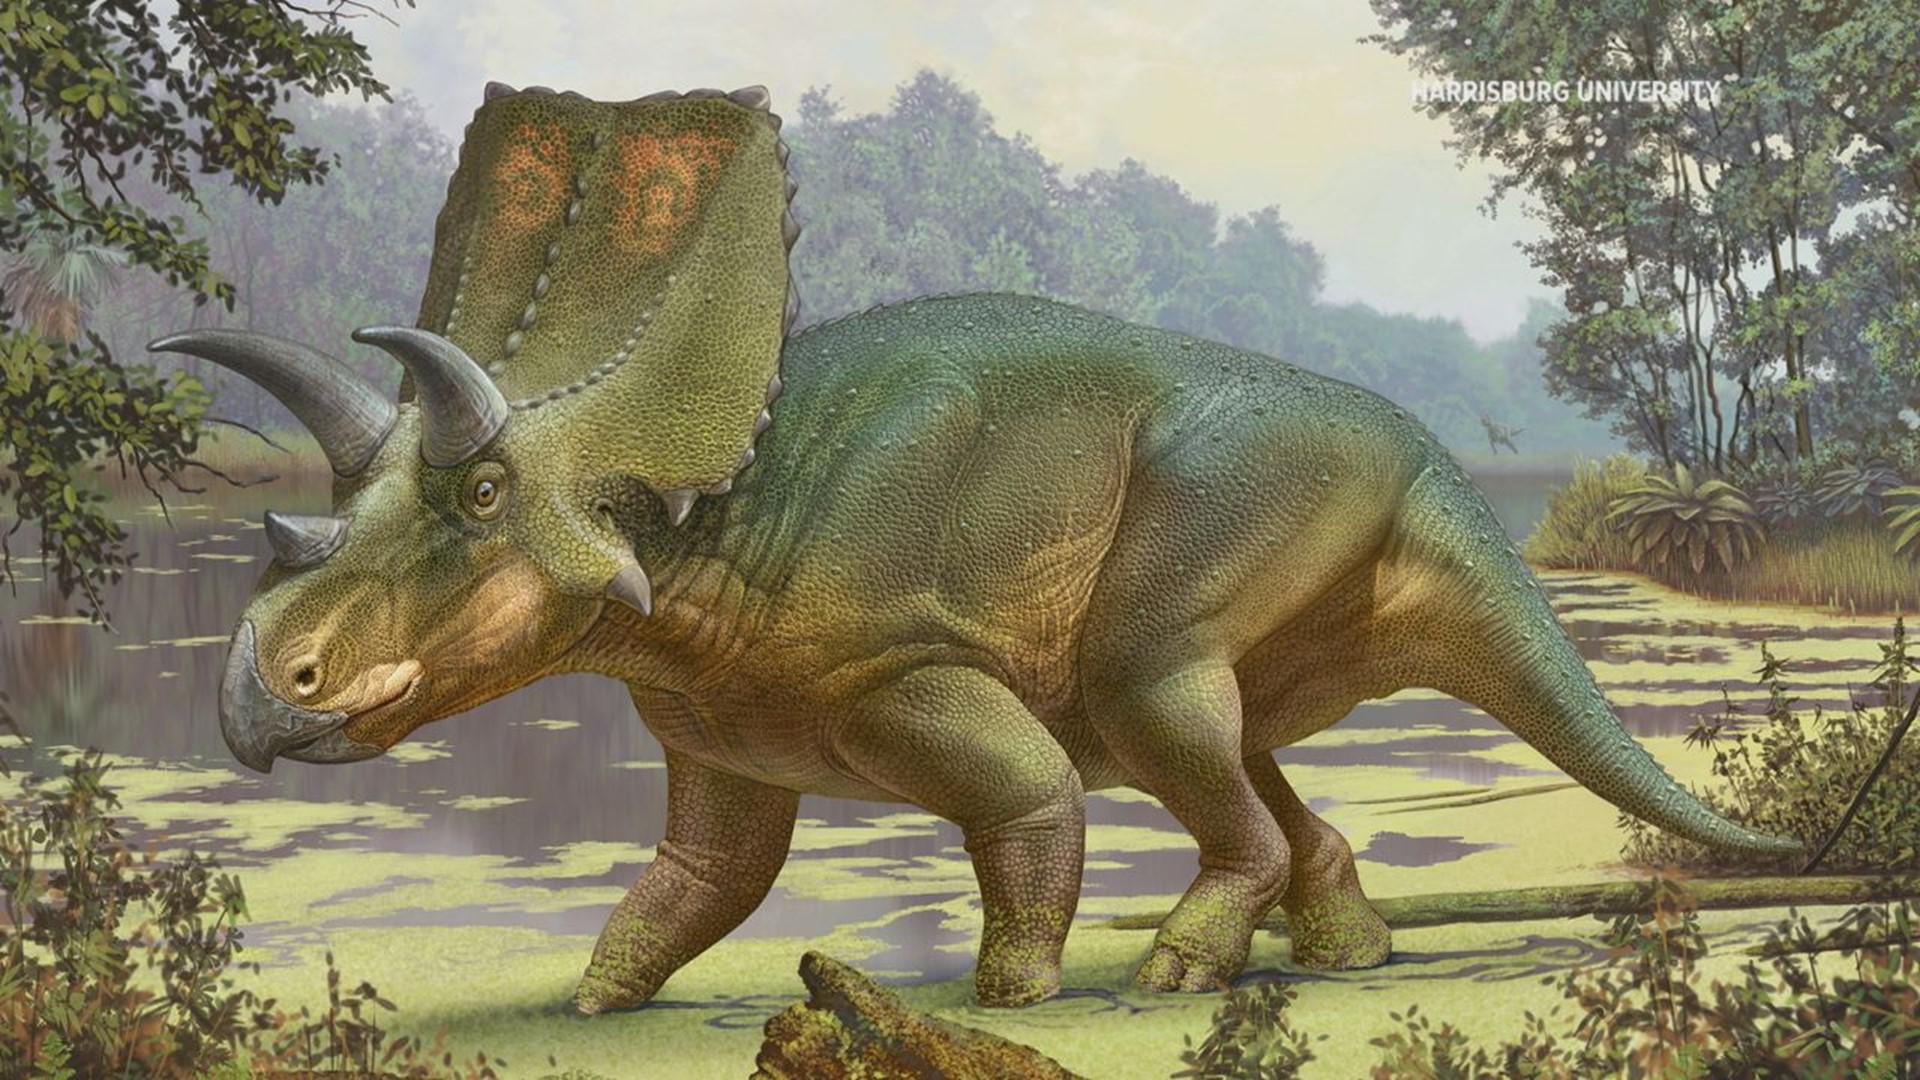 Sierraceratops turneri is the second new species named by Dr. Steven Jasinski, of HU’s Department of Environmental Science and Sustainability, in the past year.